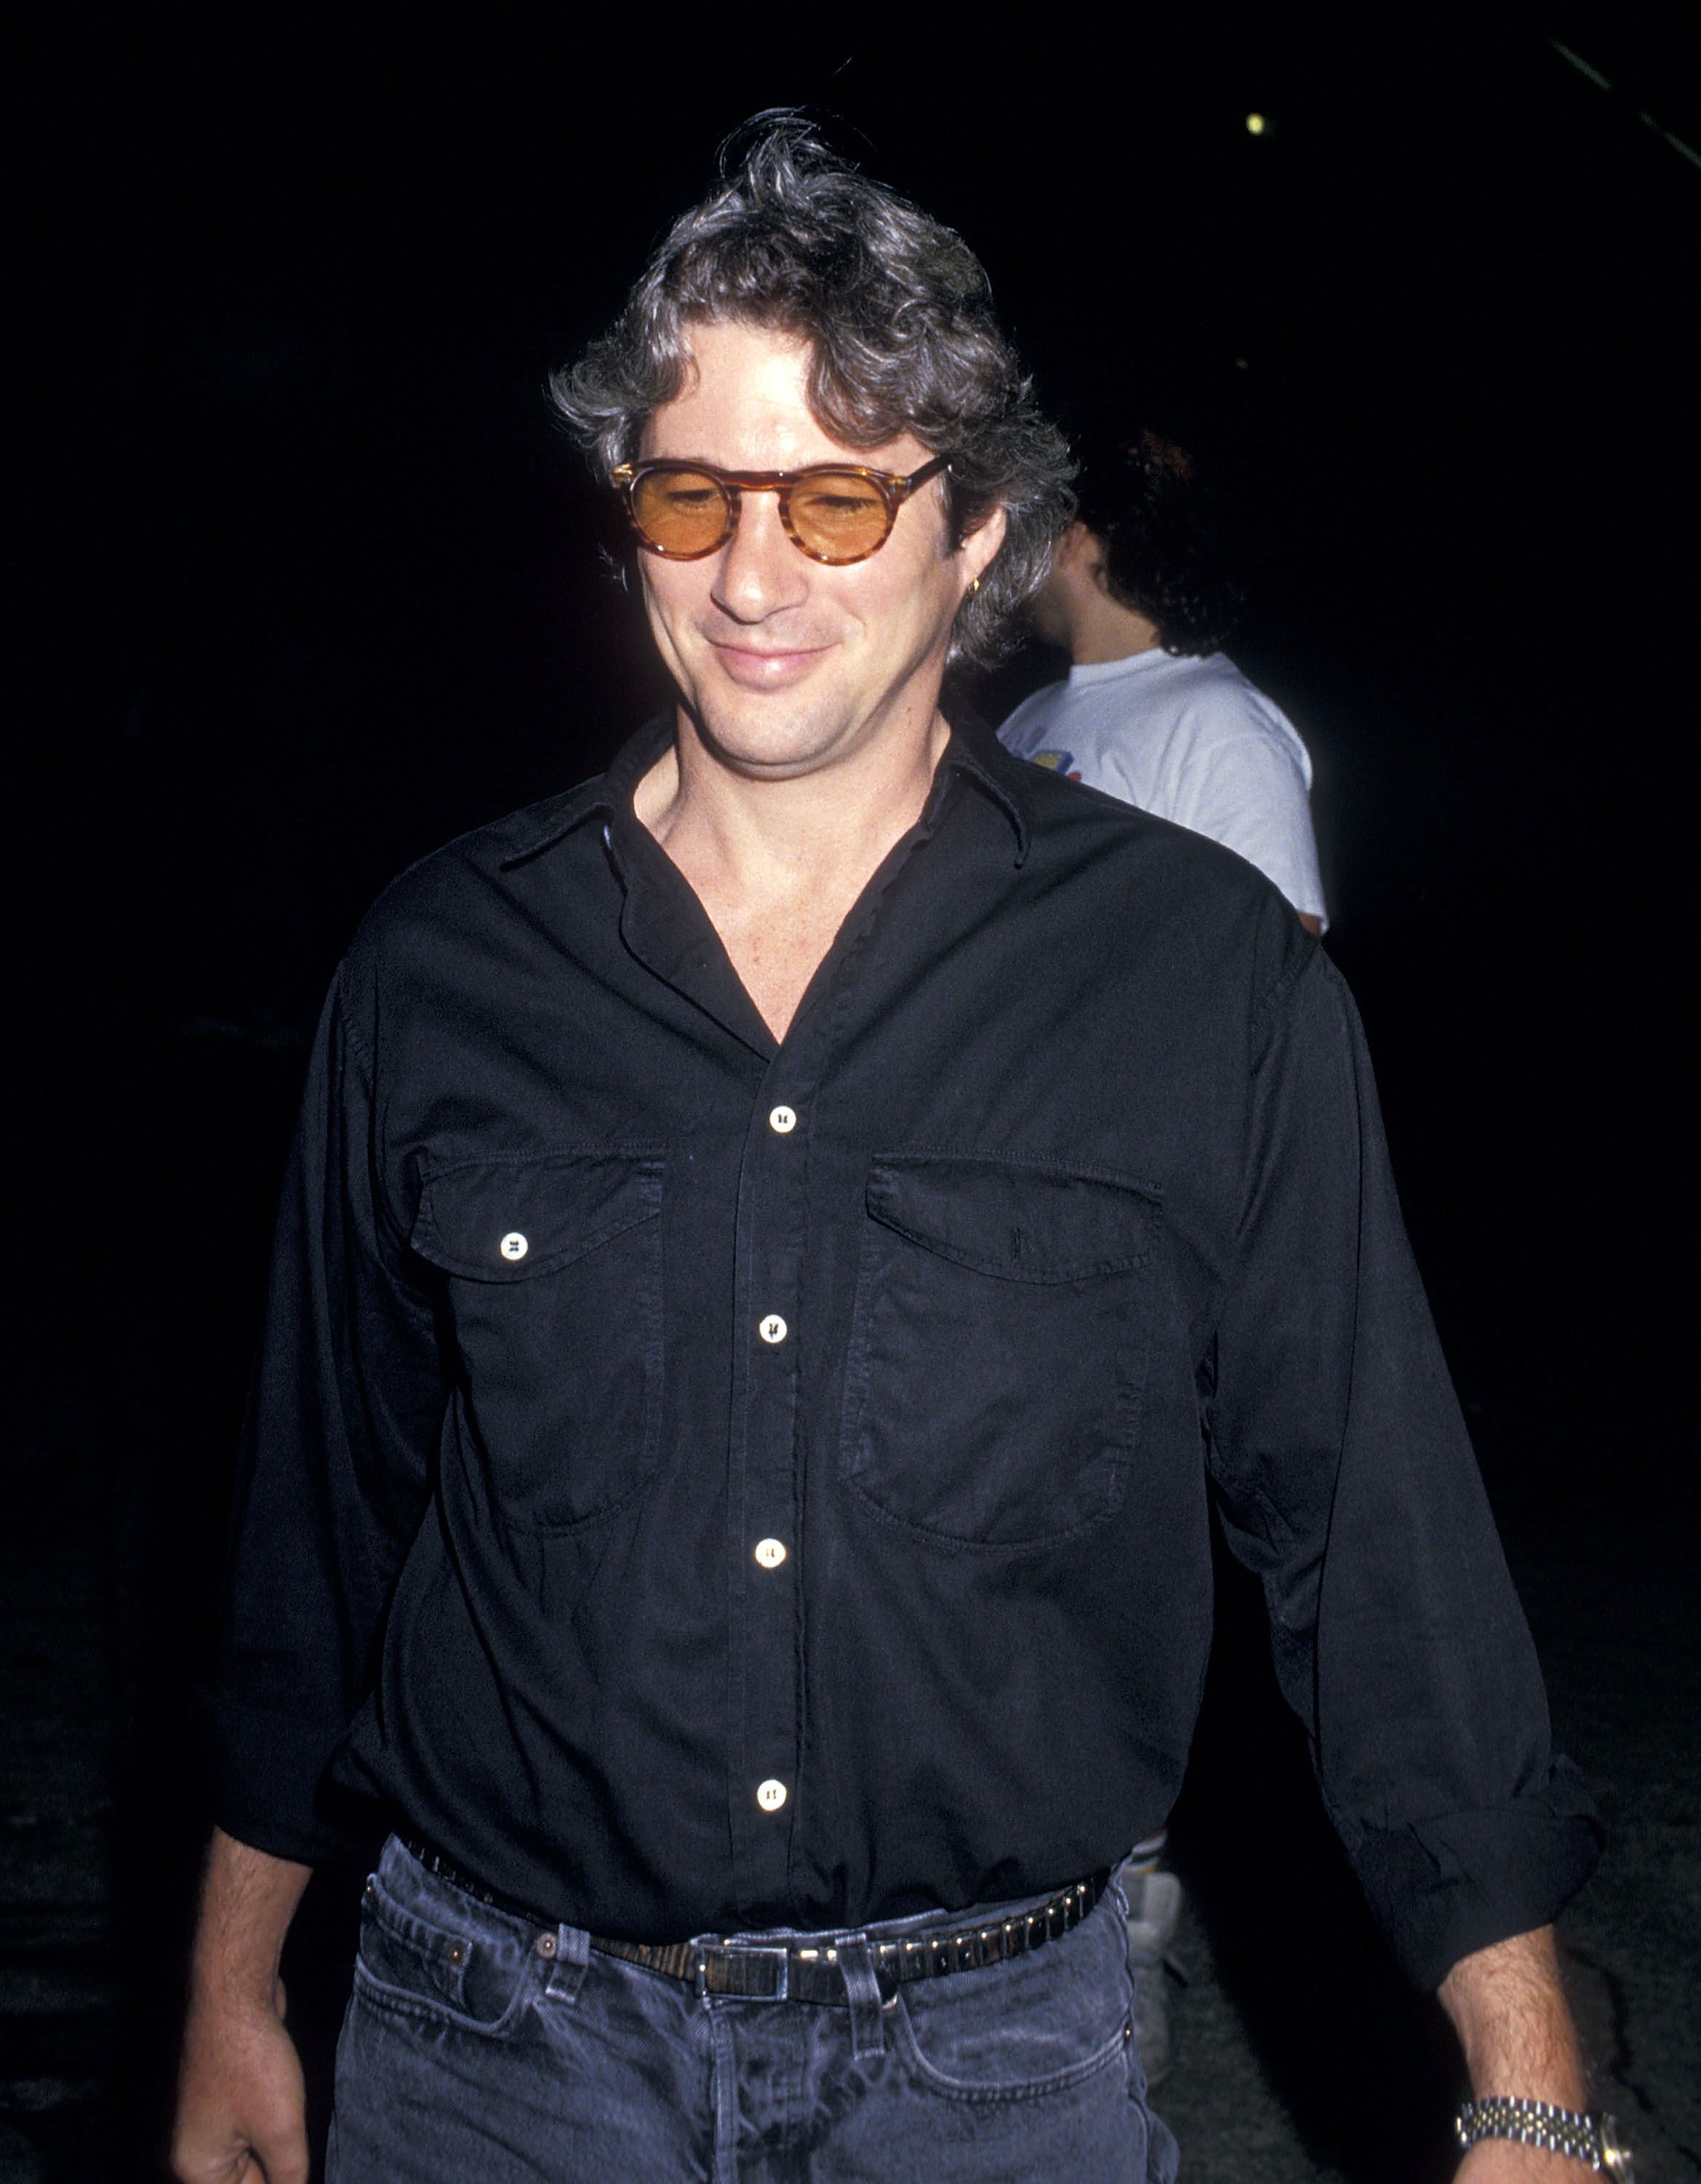 Richard Gere at a Madonna in concert for the Who's That Girl World Tour on July 13, 1987, at Madison Square Garden in New York City | Photo: Ron Galella, Ltd./Ron Galella Collection/Getty Images